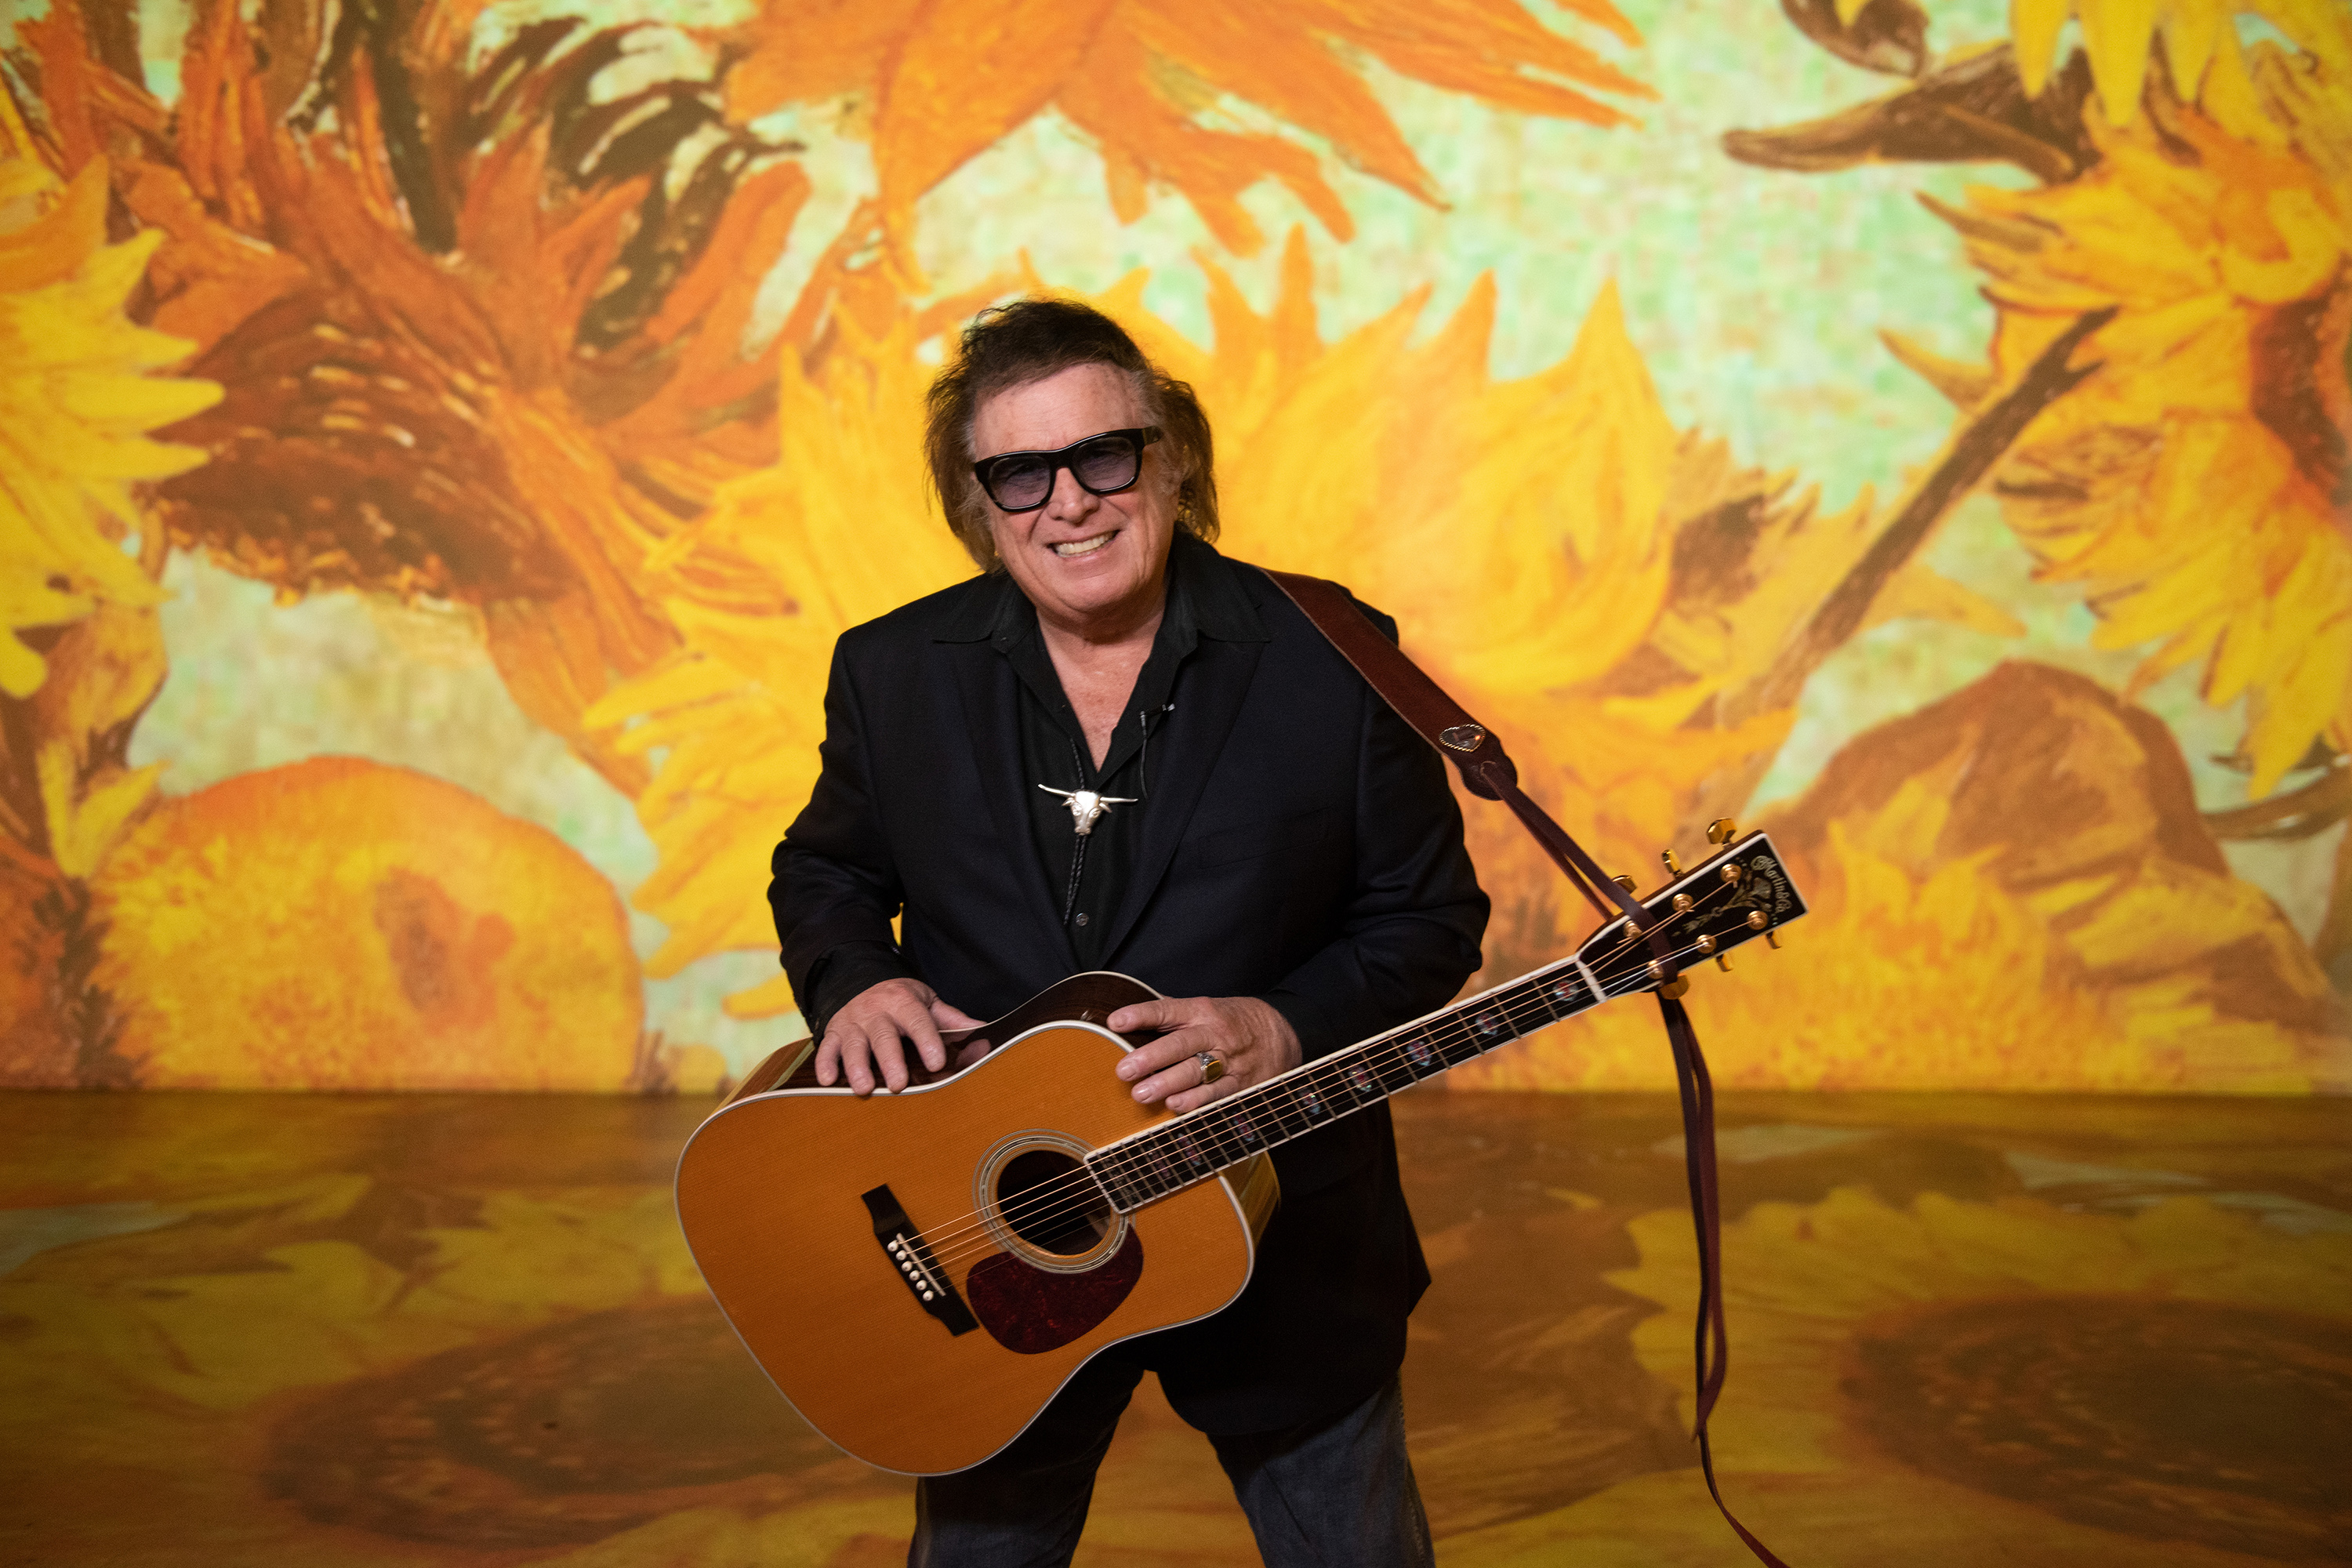 DON McLEAN, VINCE GILL, RAY STEVENS, MARTY STUART & HIS FABULOUS SUPERLATIVES, JIM GUERICO & GEORGE MASSENBURG TO JOIN MUSICIANS HALL OF FAME